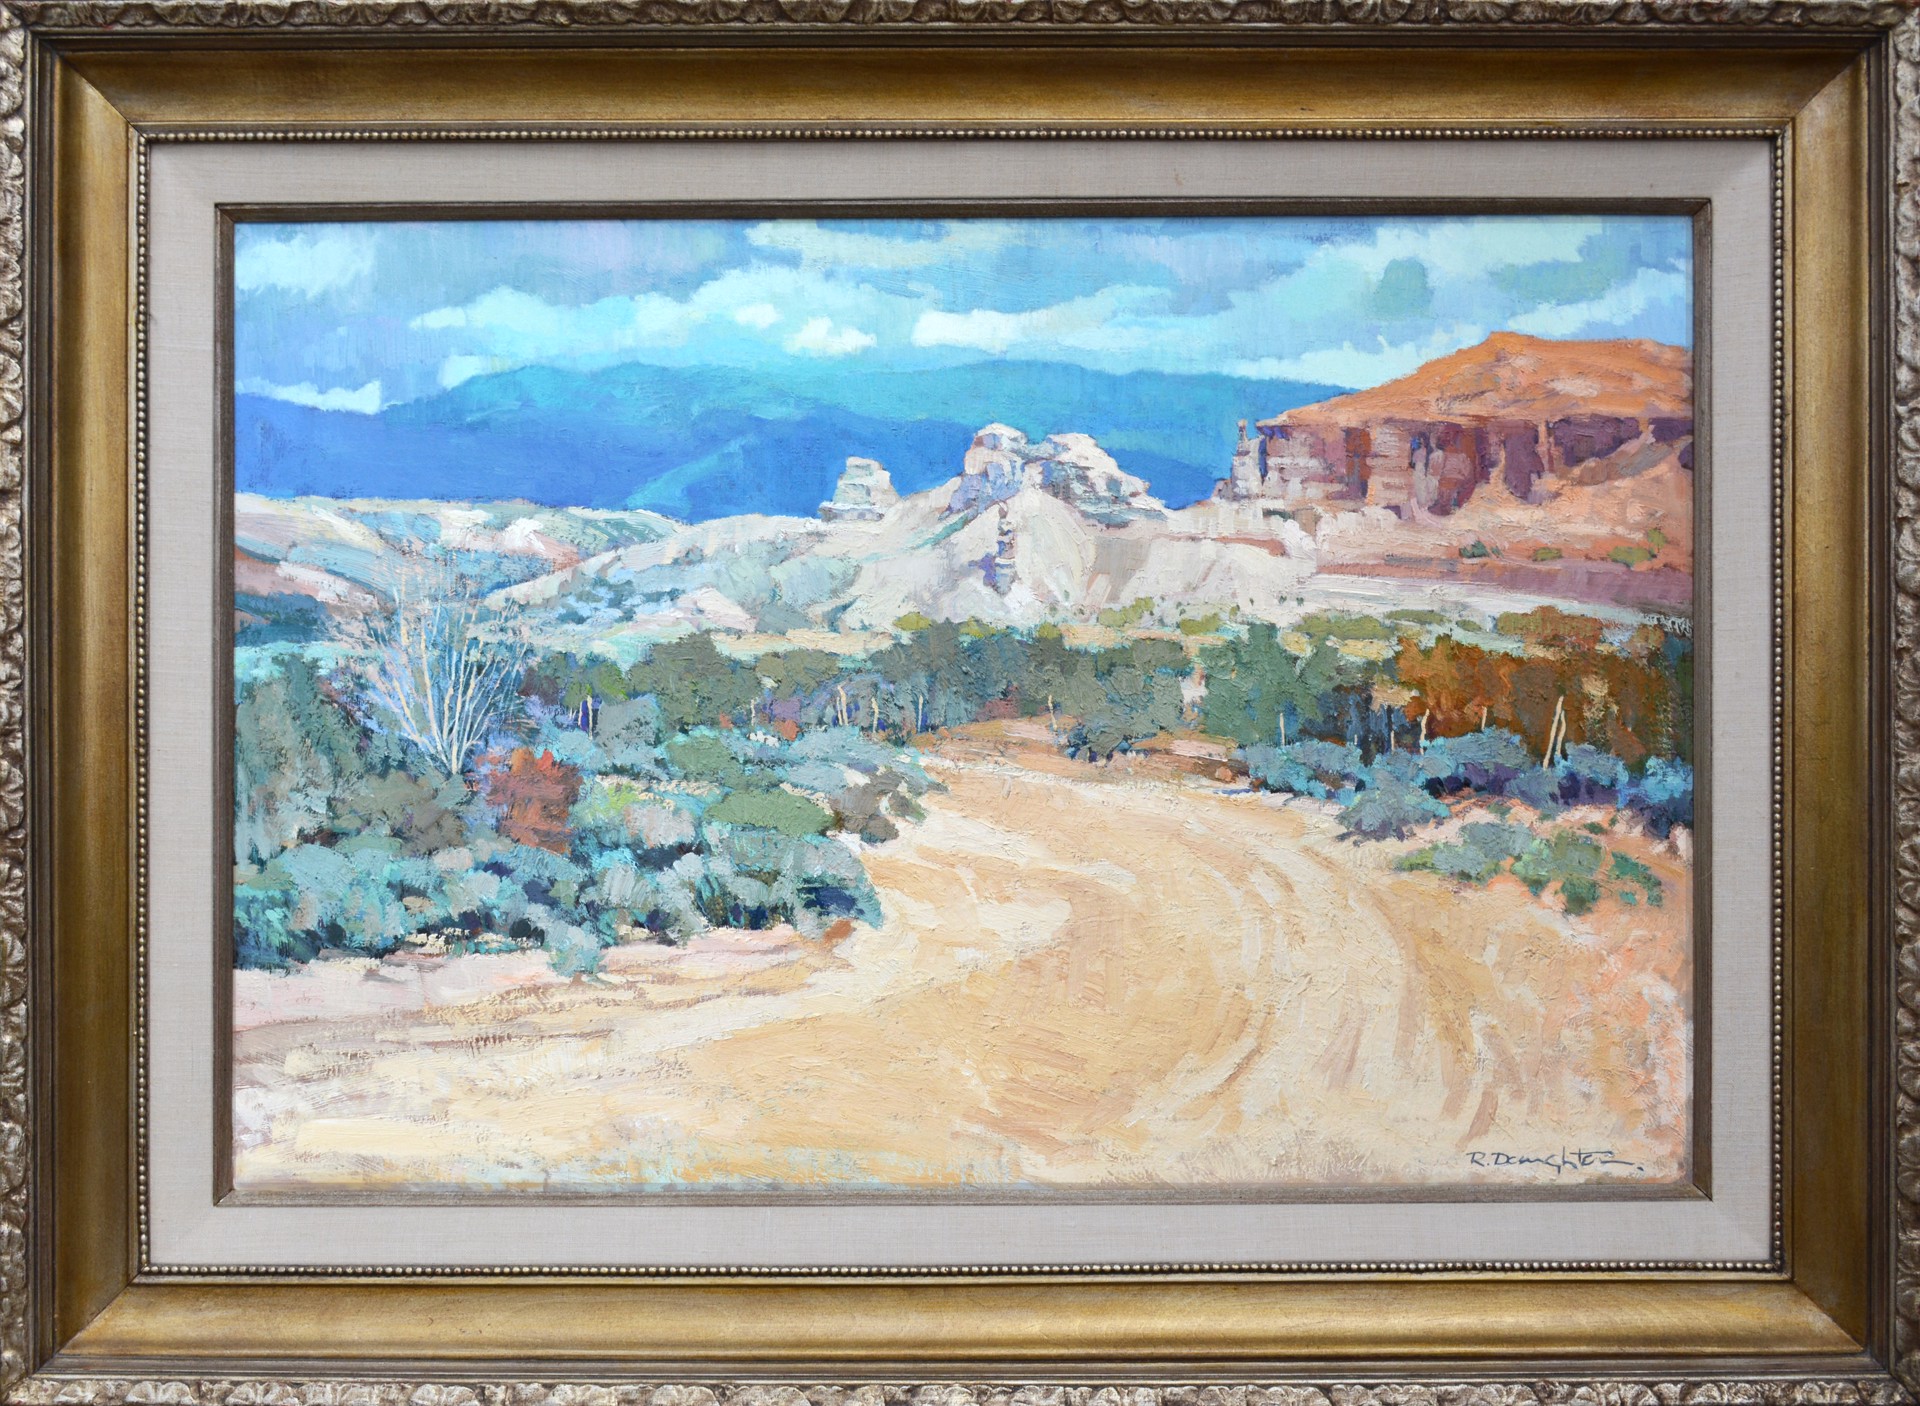 Robert Daughters (1929-2013), Dry Arroyo by Secondary Offerings